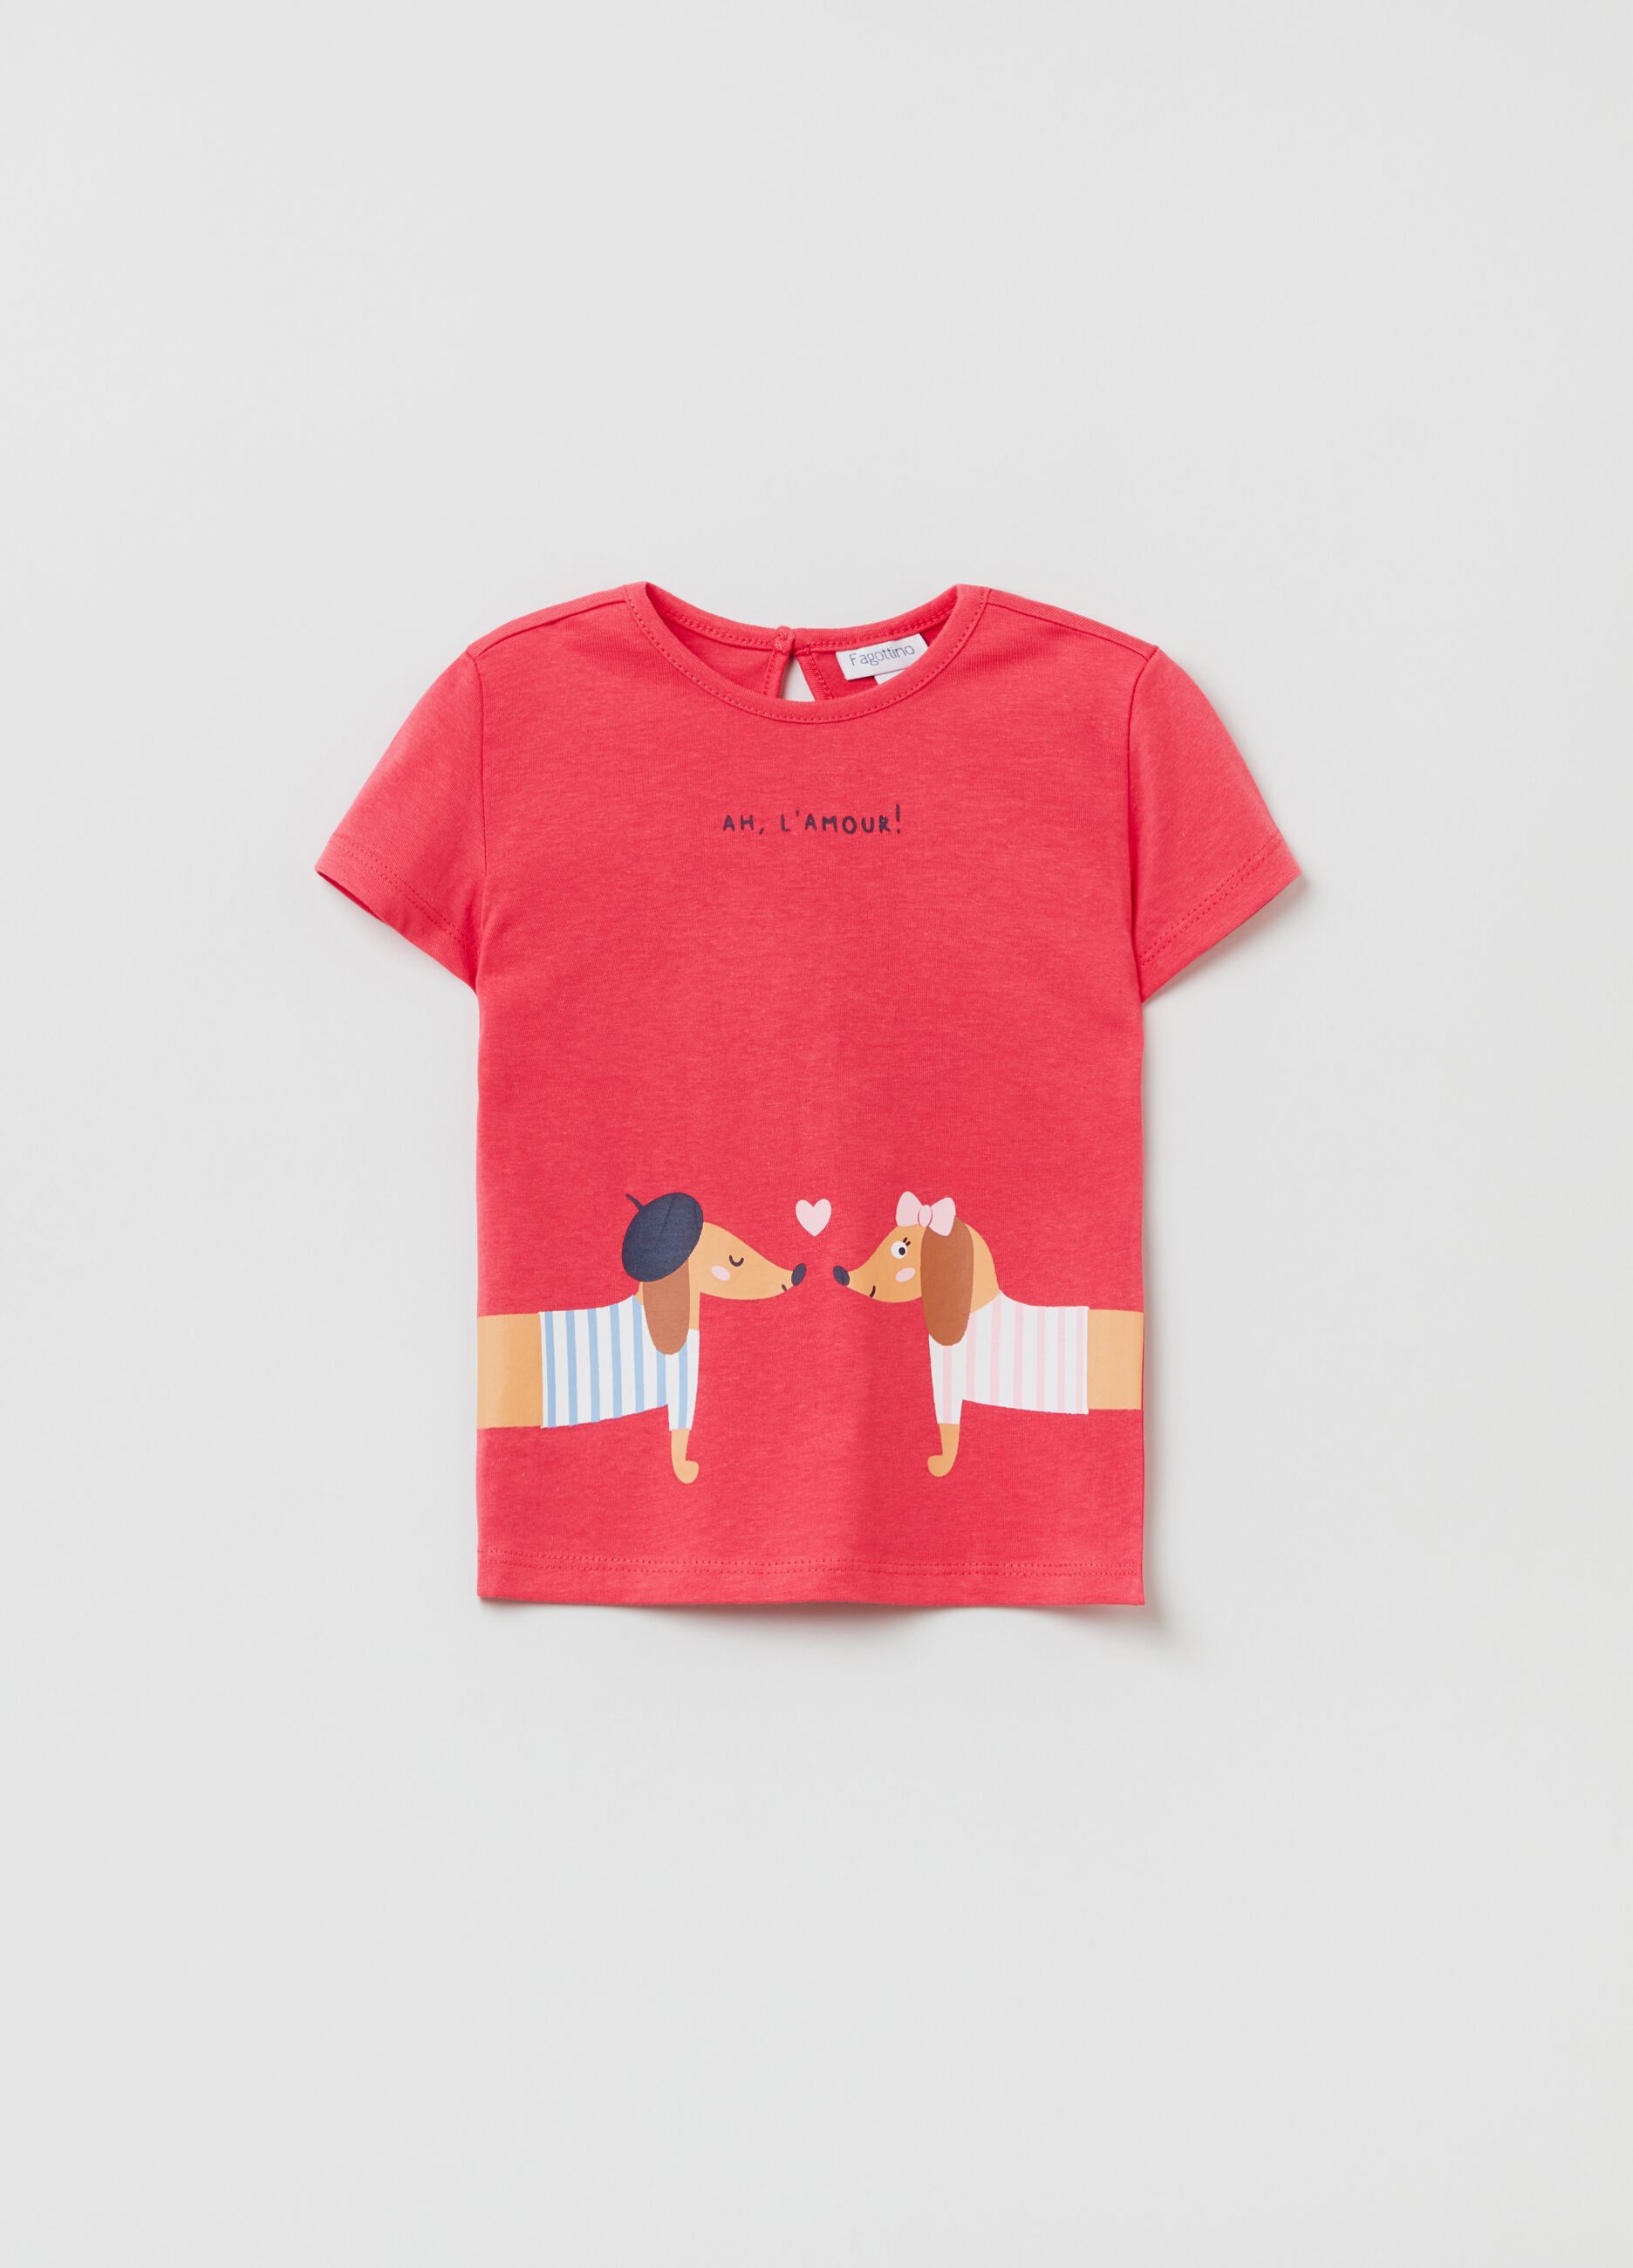 Cotton T-shirt with dachshunds print